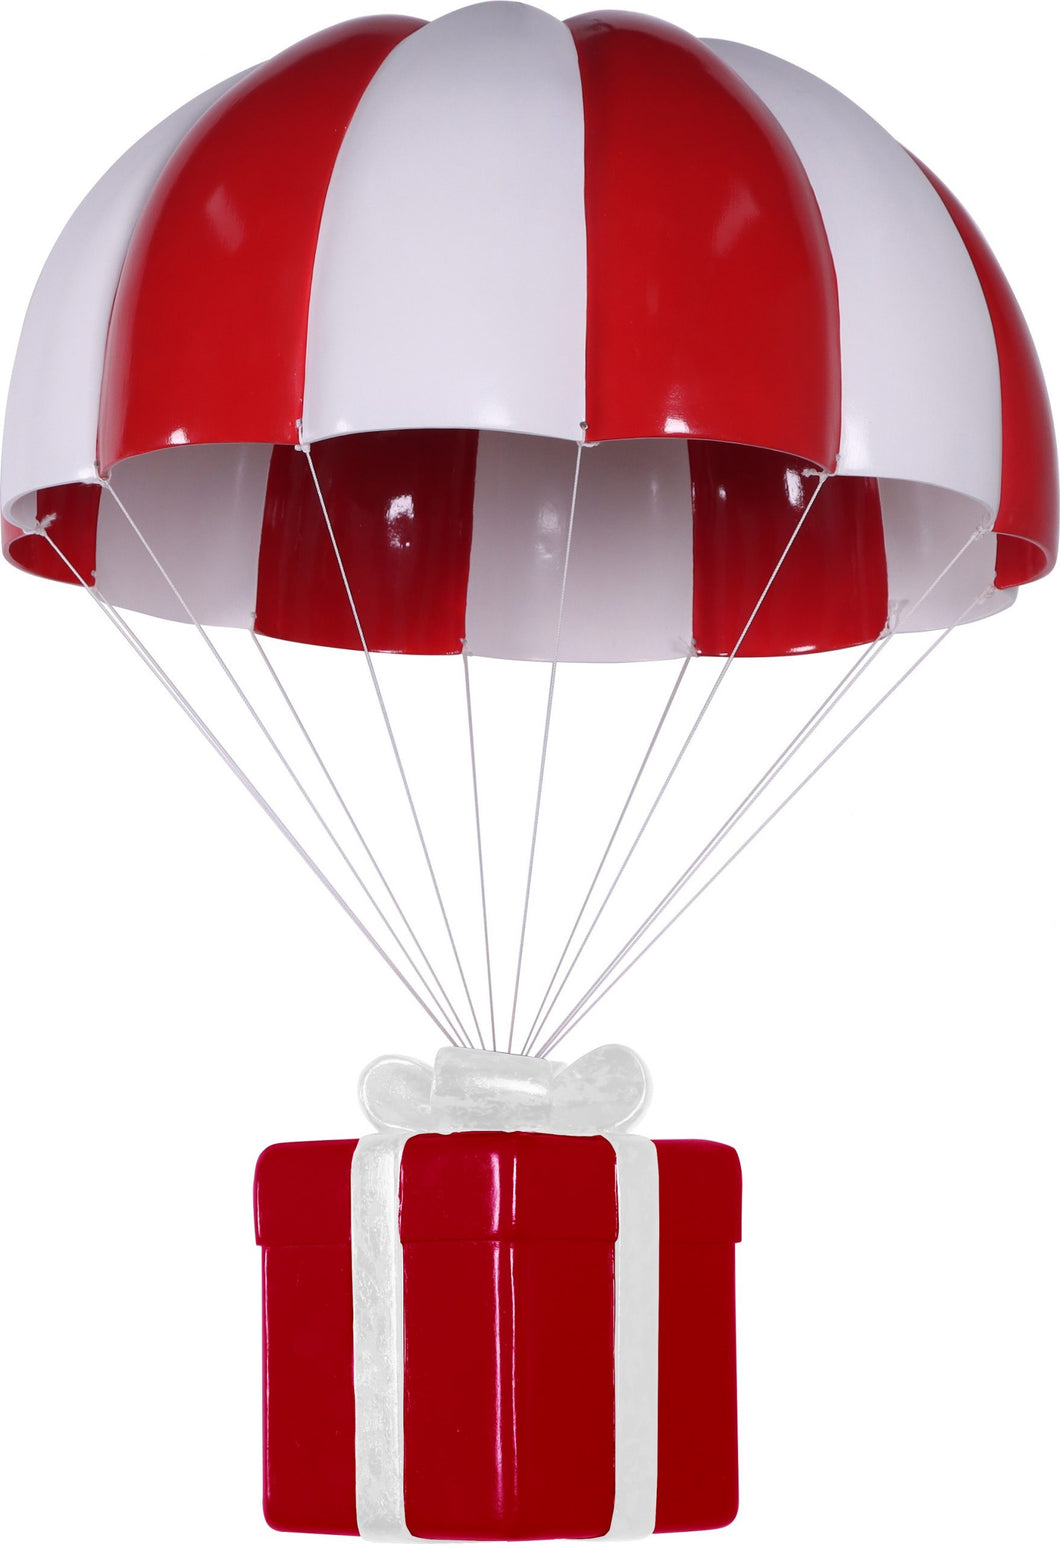 Parachute With Gift Box